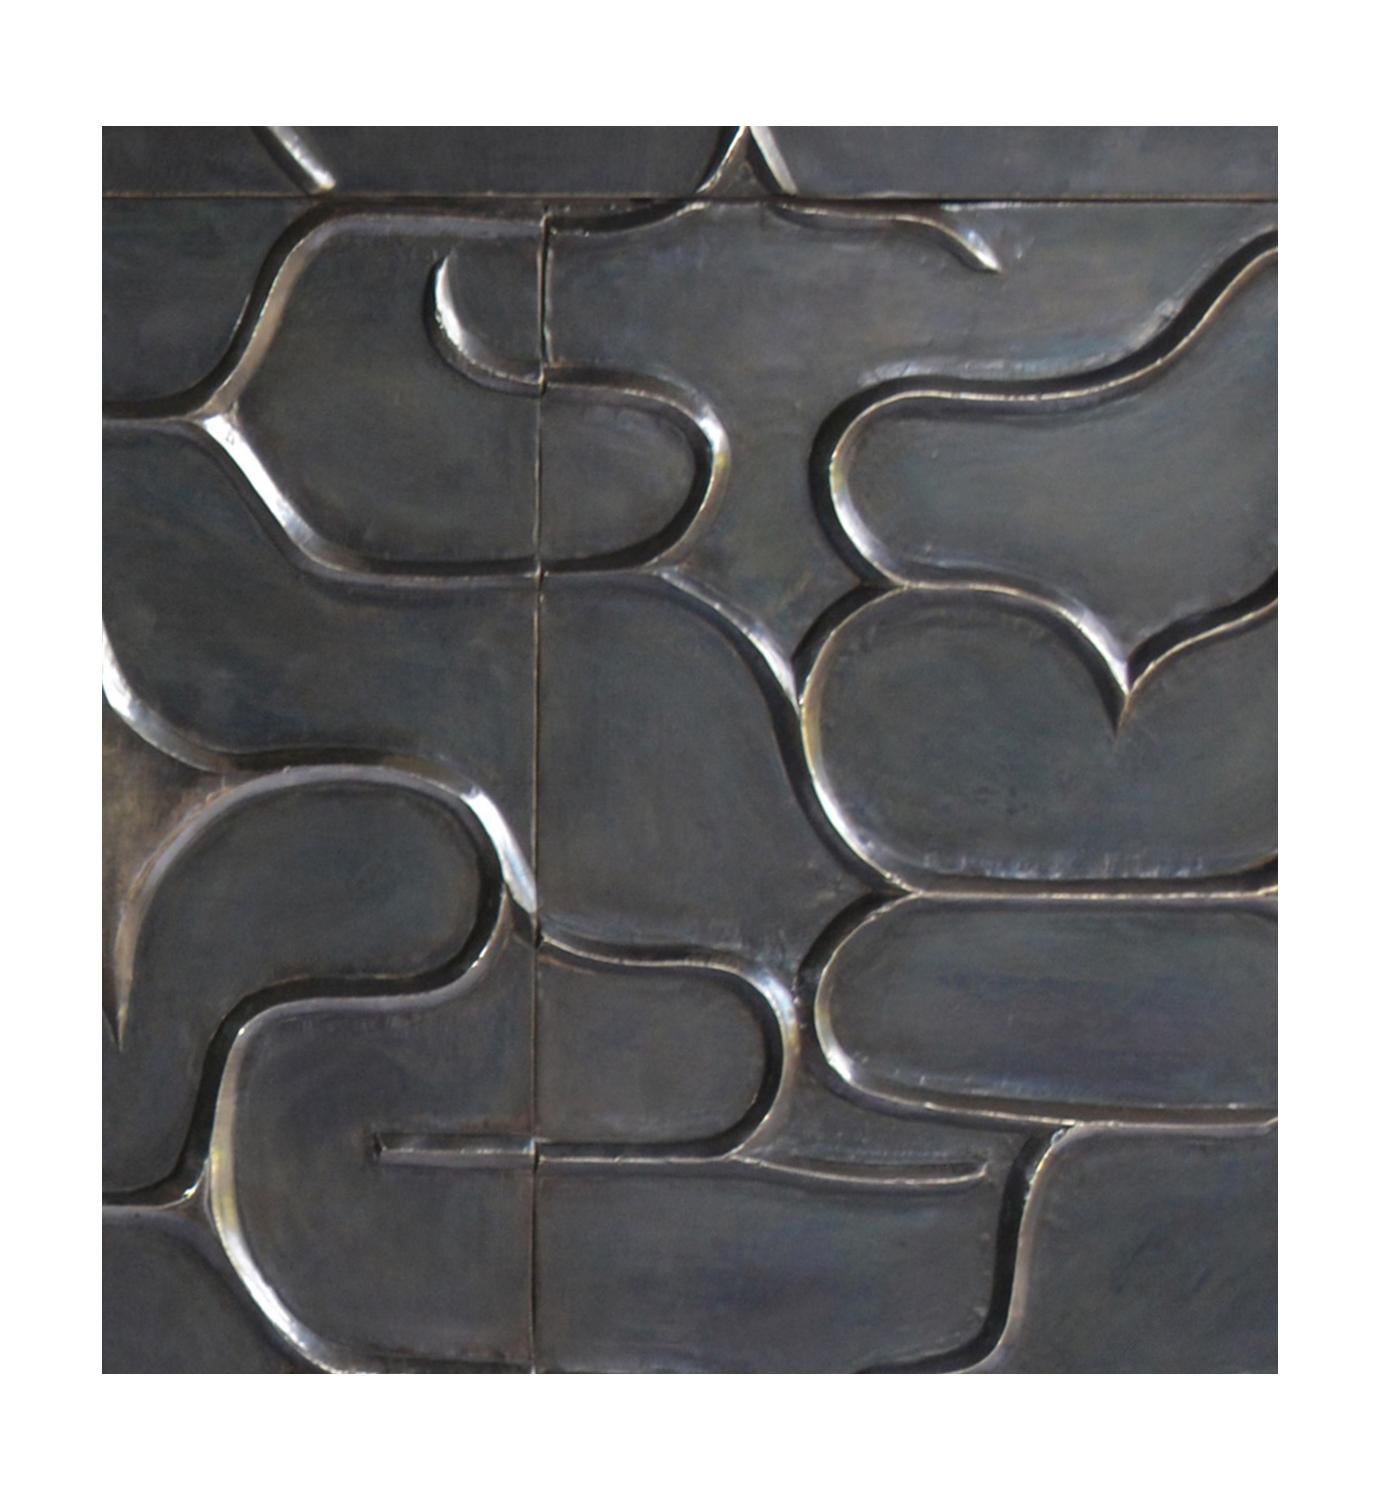 A remarkable piece in which each of the exterior faces is entirely sculpted out of a solid piece of wood by hand, creating a design inspired from one of Stephanie Odegard's rug designs. It is then covered with metal sheeting. The available options